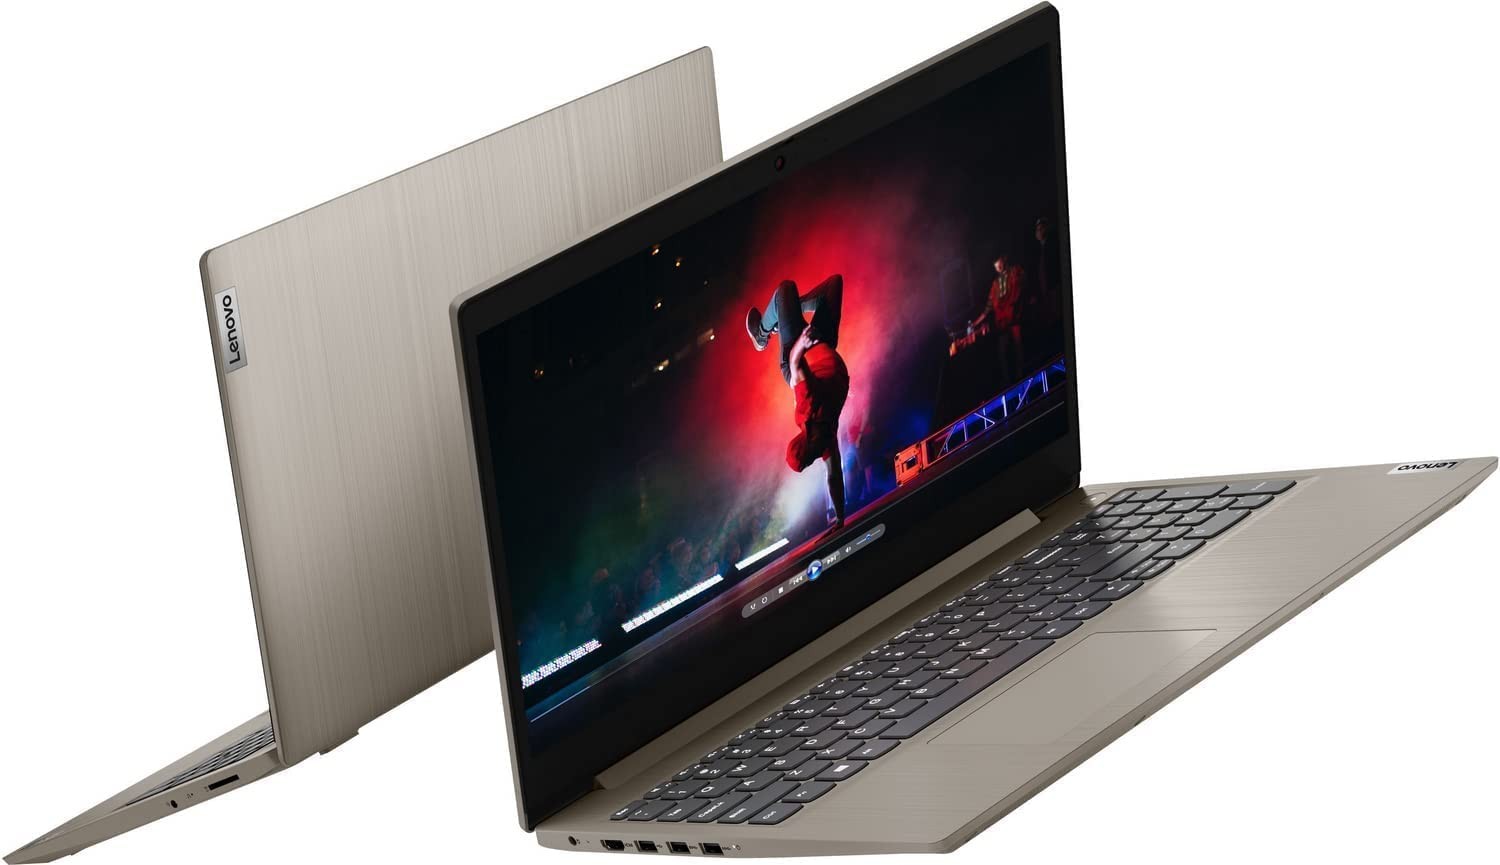 Lenovo’s IdeaPad 3 Laptop is currently 60 percent off!